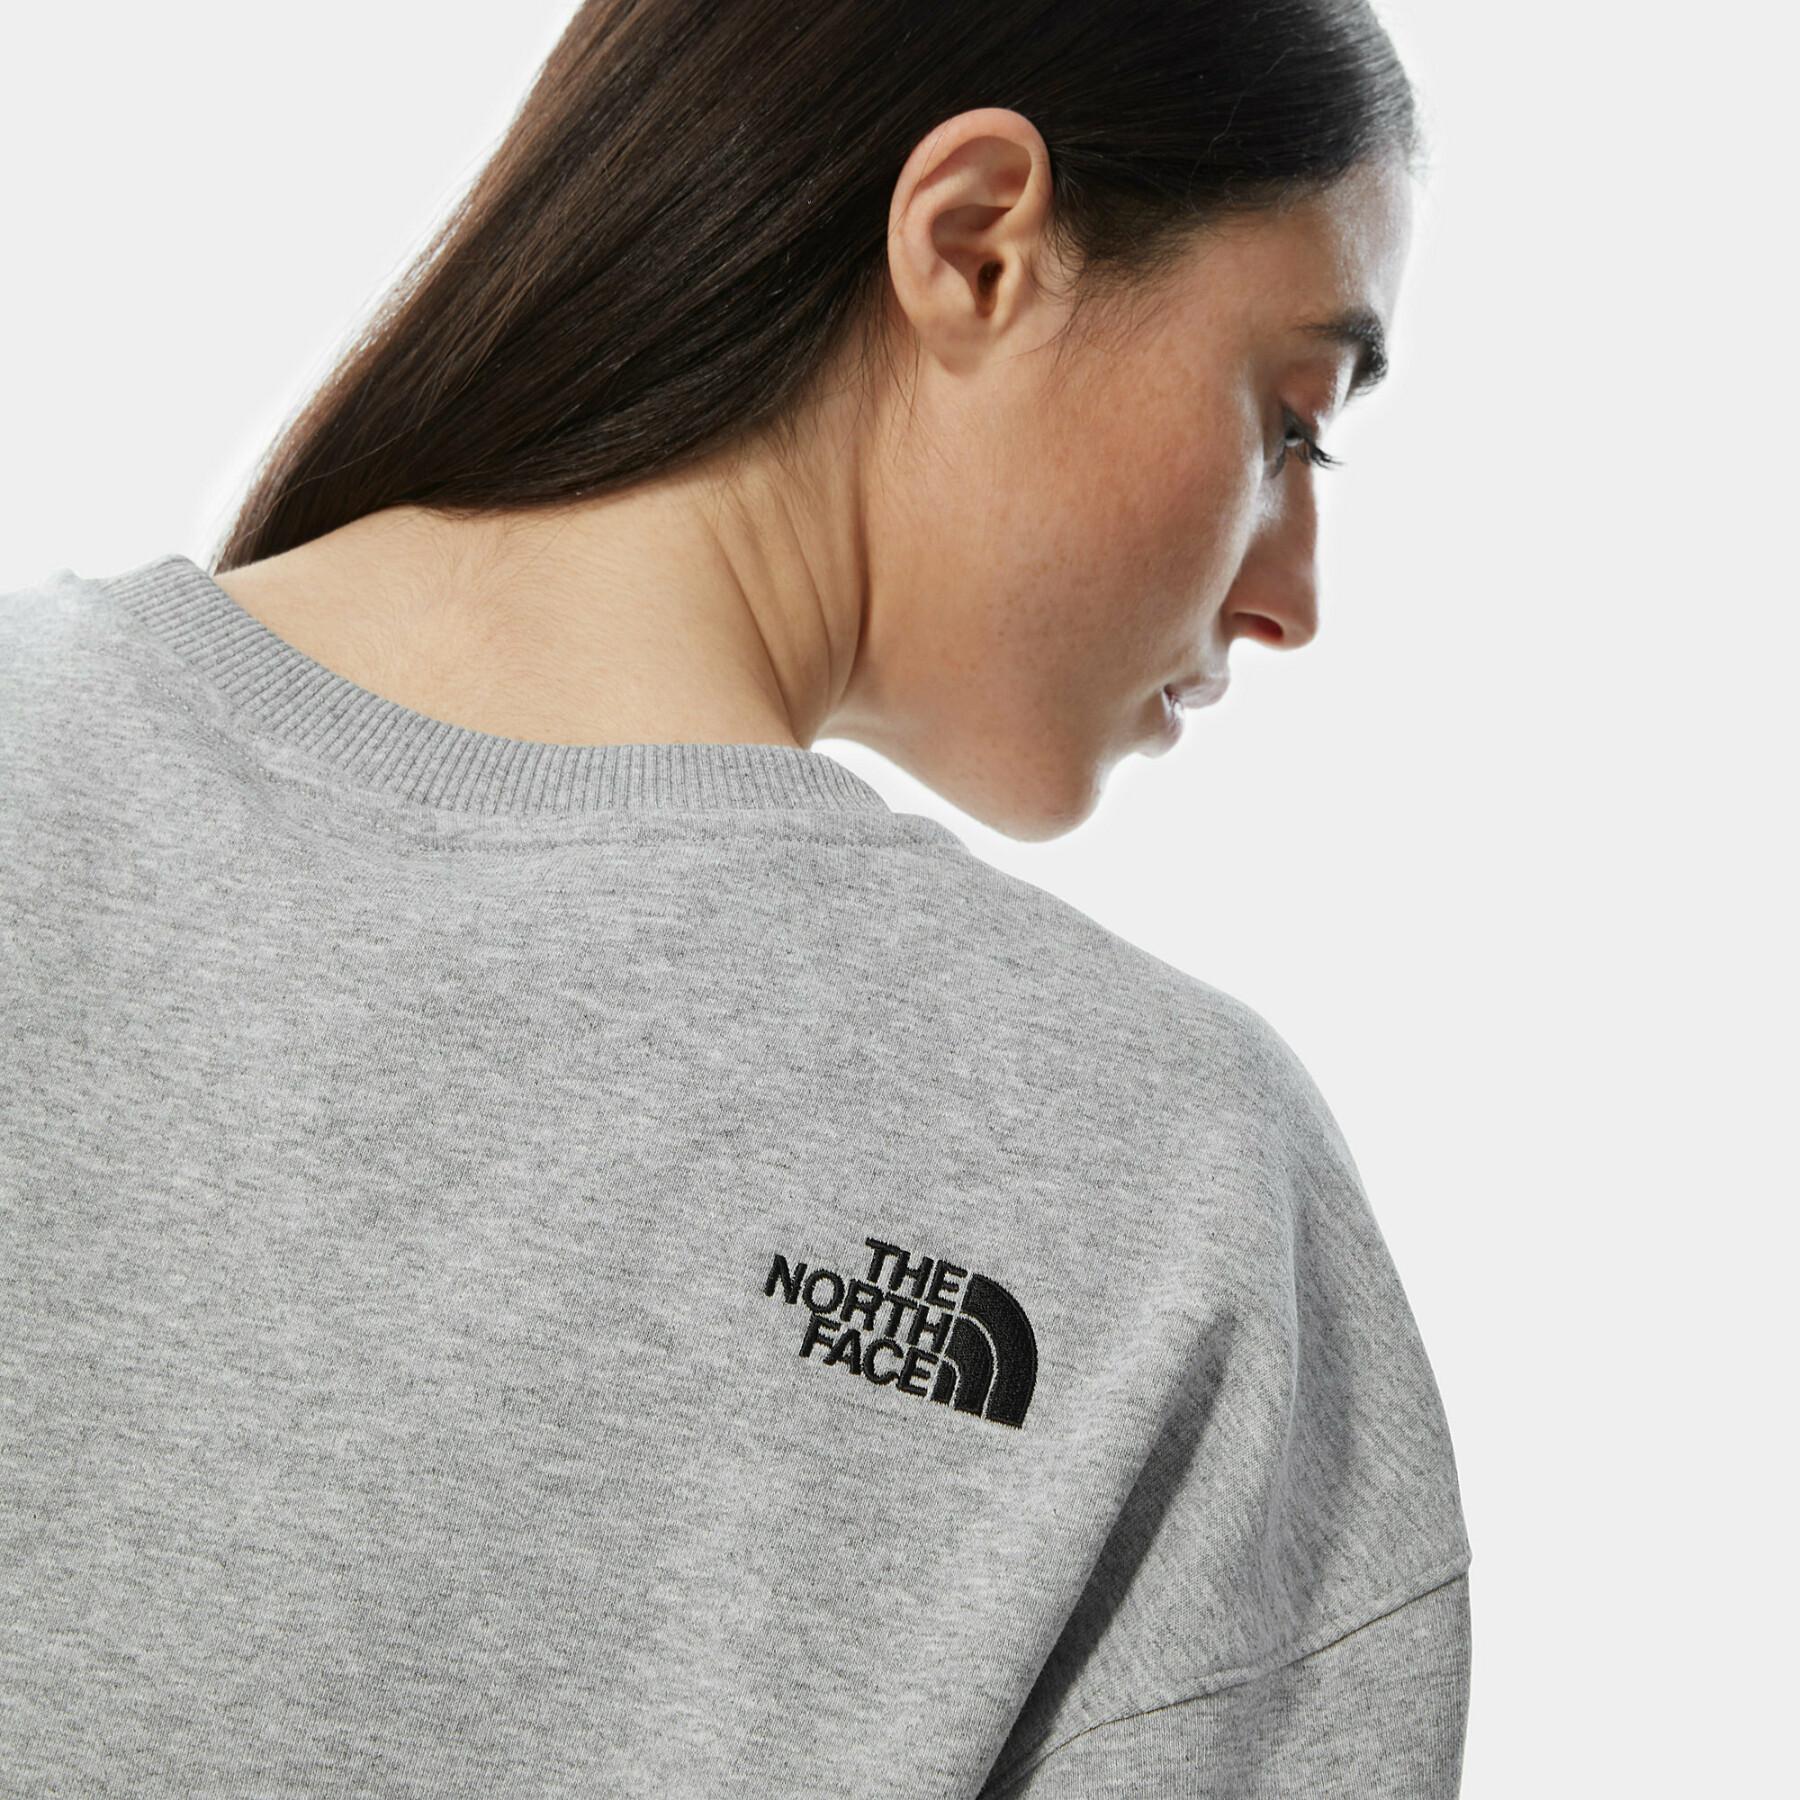 Sweatshirt femme The North Face Oversized Essential